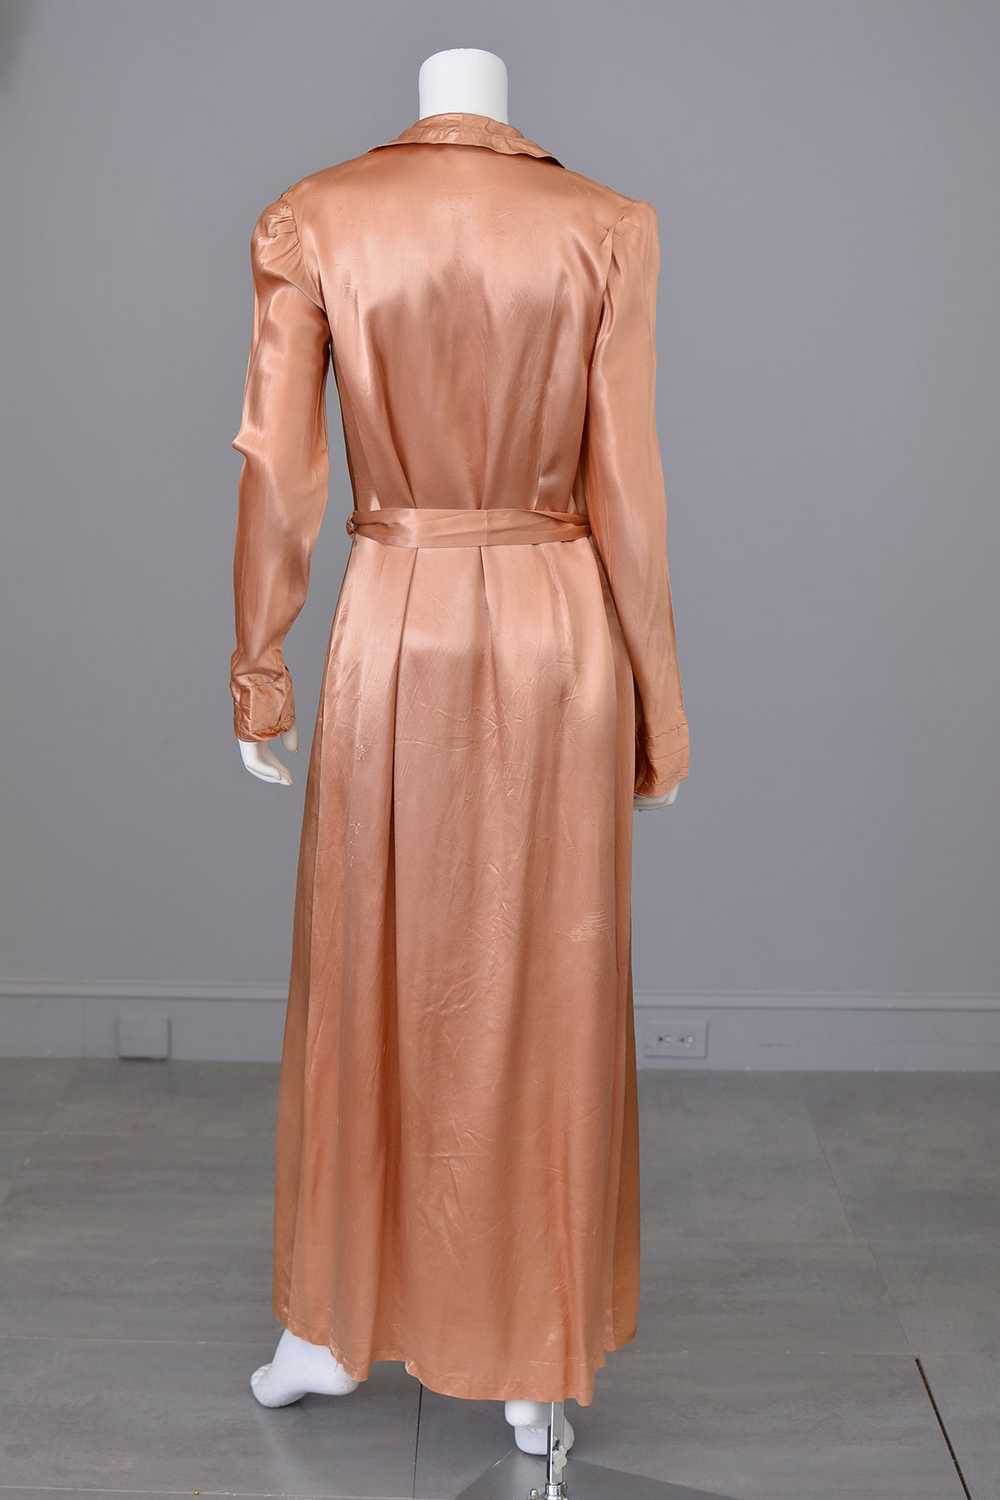 1940s Copper Satin Lounging Robe - image 3